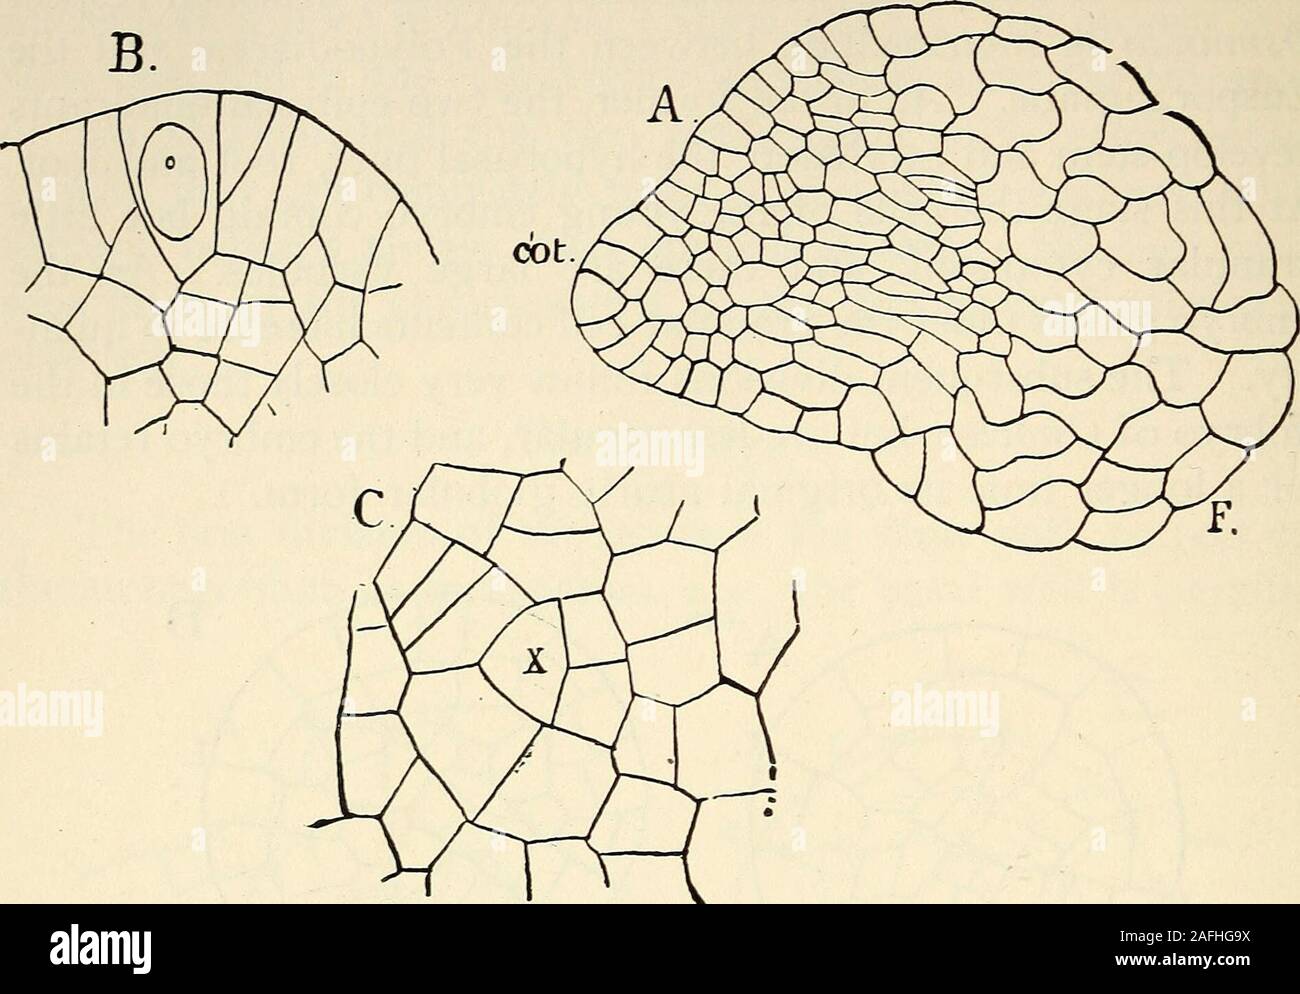 . The structure and development of mosses and ferns (Archegoniatae). Fig, 199.—Three sections of one embryo of O. cinnamomea in which the root (r) isespecially well marked, X260. Lettering as in the last. The direction of growth of the cotyledon is determined inpart by the first walls in its primary octants. The outer octantusually becomes at once its apical cell, and if its first segmentis formed on the side next the octant wall, this throws the axisof growth very much to one side, so that the axis of the leafmay be almost at right angles to the median line of the embryo.Otherw^ise it nearly Stock Photo